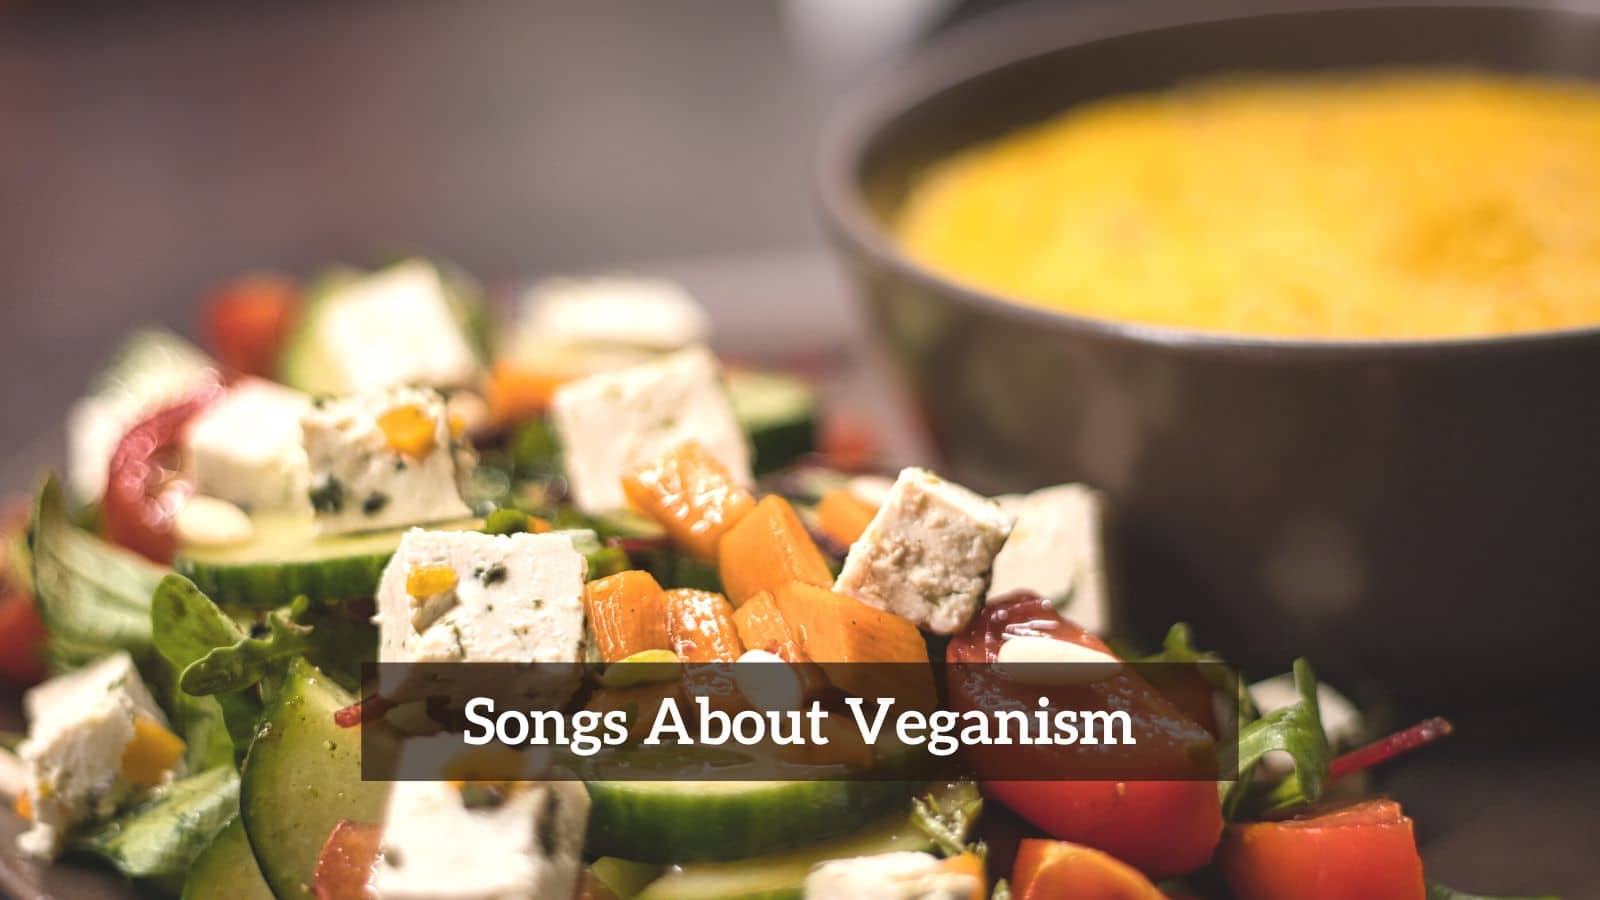 Songs About Veganism